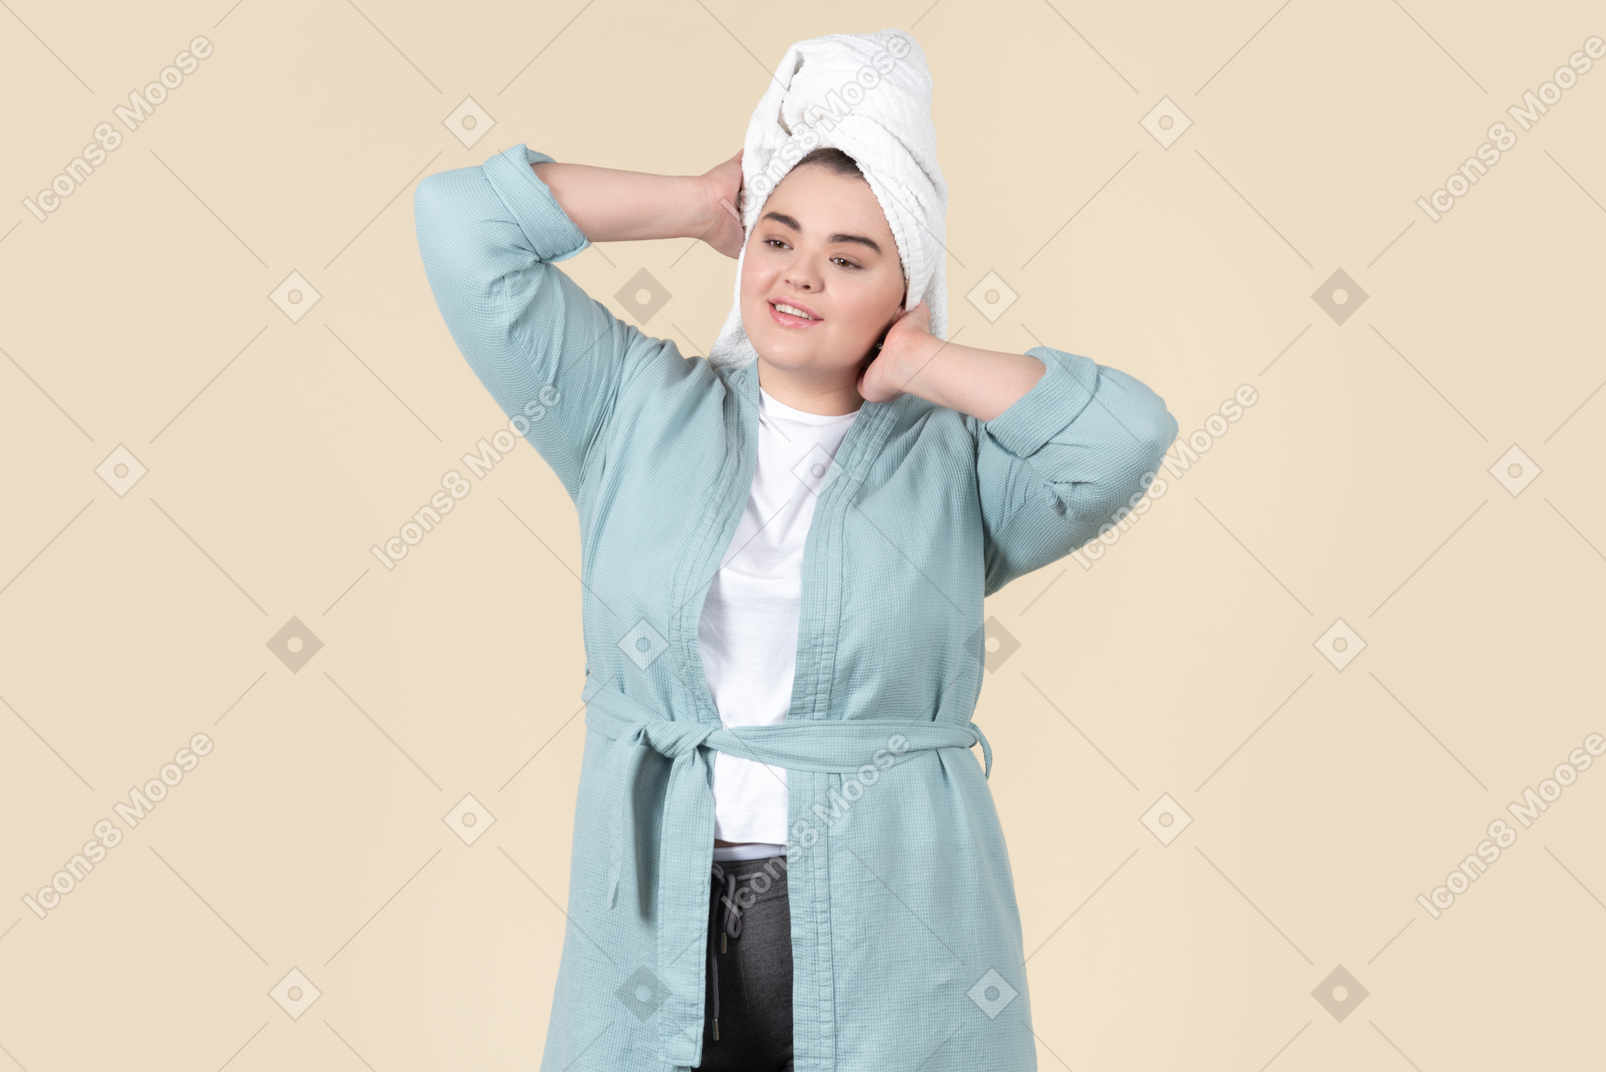 Young plus-size woman in a light blue bathrobe and with a white towel on her head, standing against a plain beige background